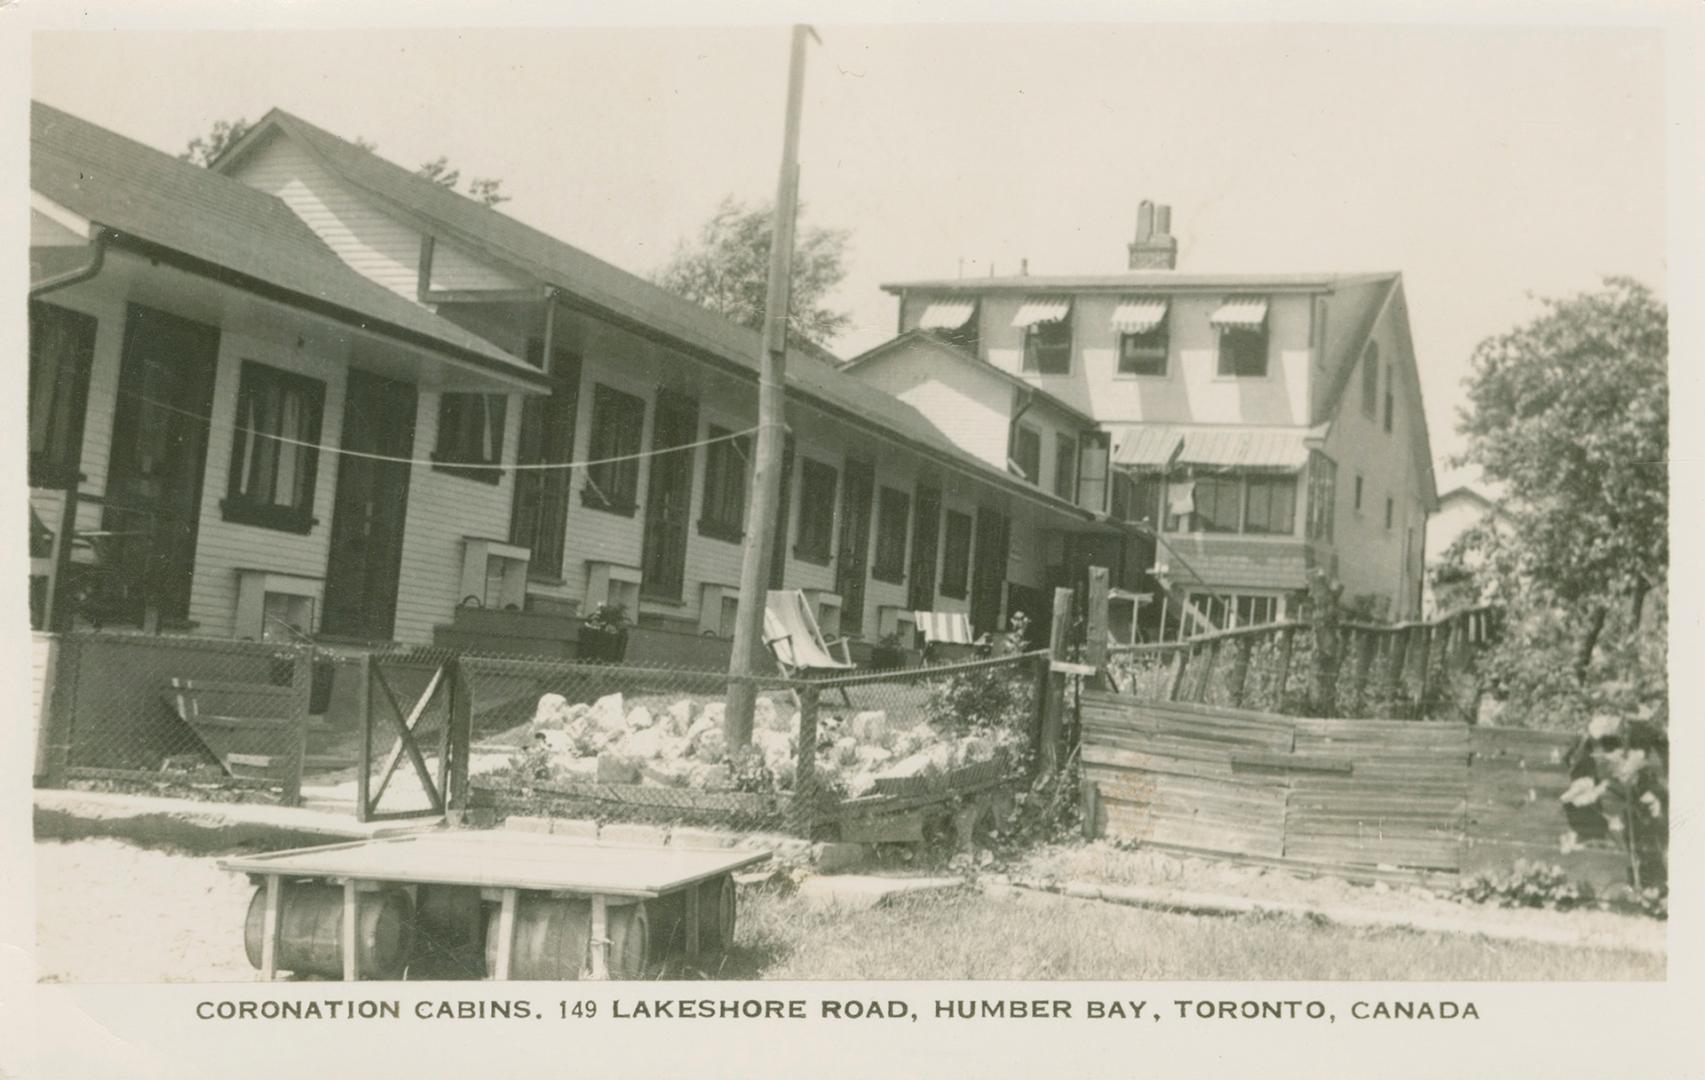 Black and white photograph of a row of summer cottages in front of a larger house.